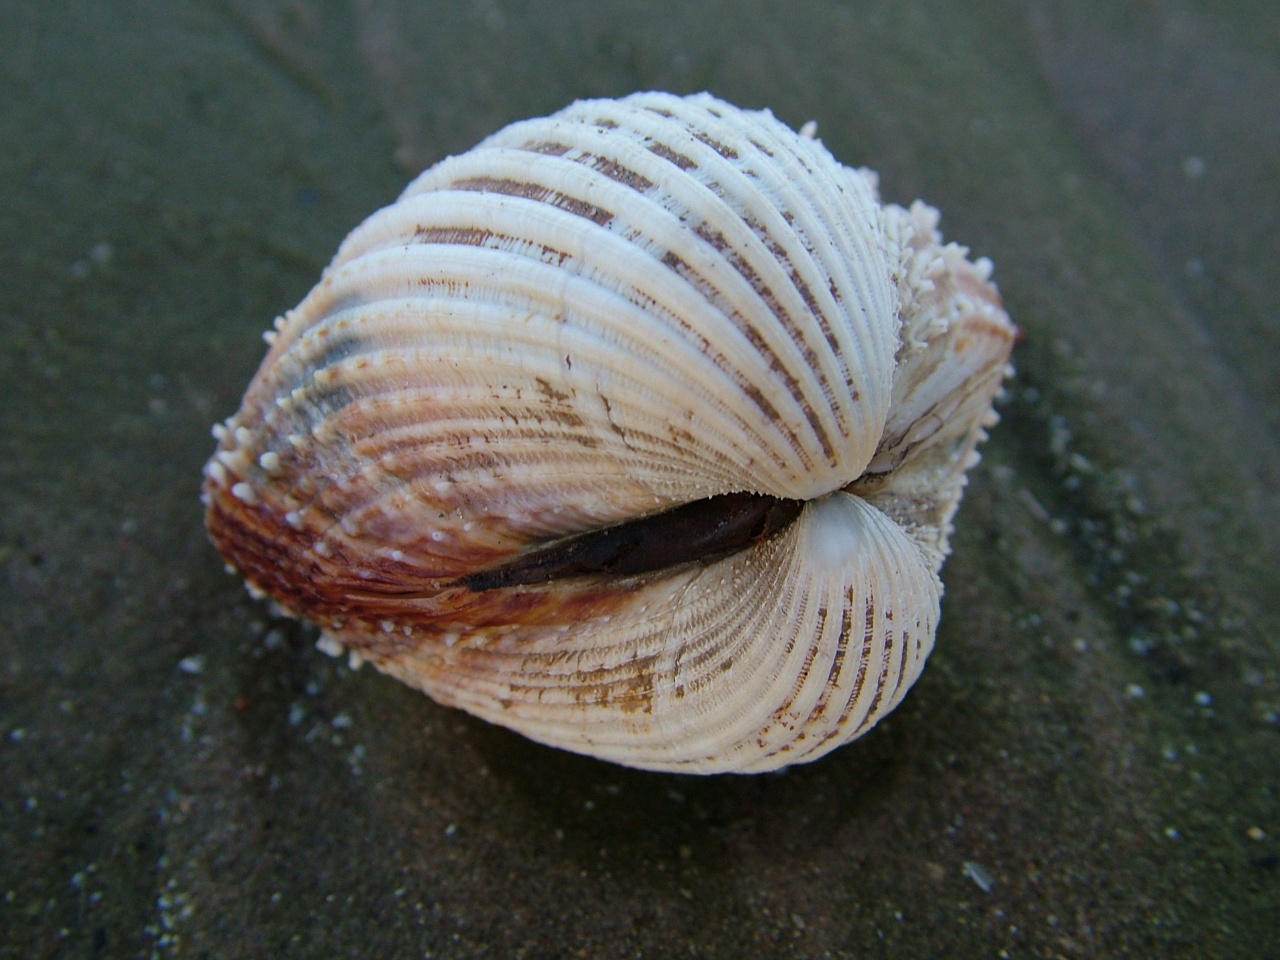 Cardium épineux - Acanthocardia echinata - <a href='https://commons.wikimedia.org/wiki/File:Shell_On_Sand.jpg'>Chris Howells (= Chowells)</a>, <a href='http://creativecommons.org/licenses/by-sa/3.0/'>CC BY-SA 3.0</a>, via Wikimedia Commons - BioObs